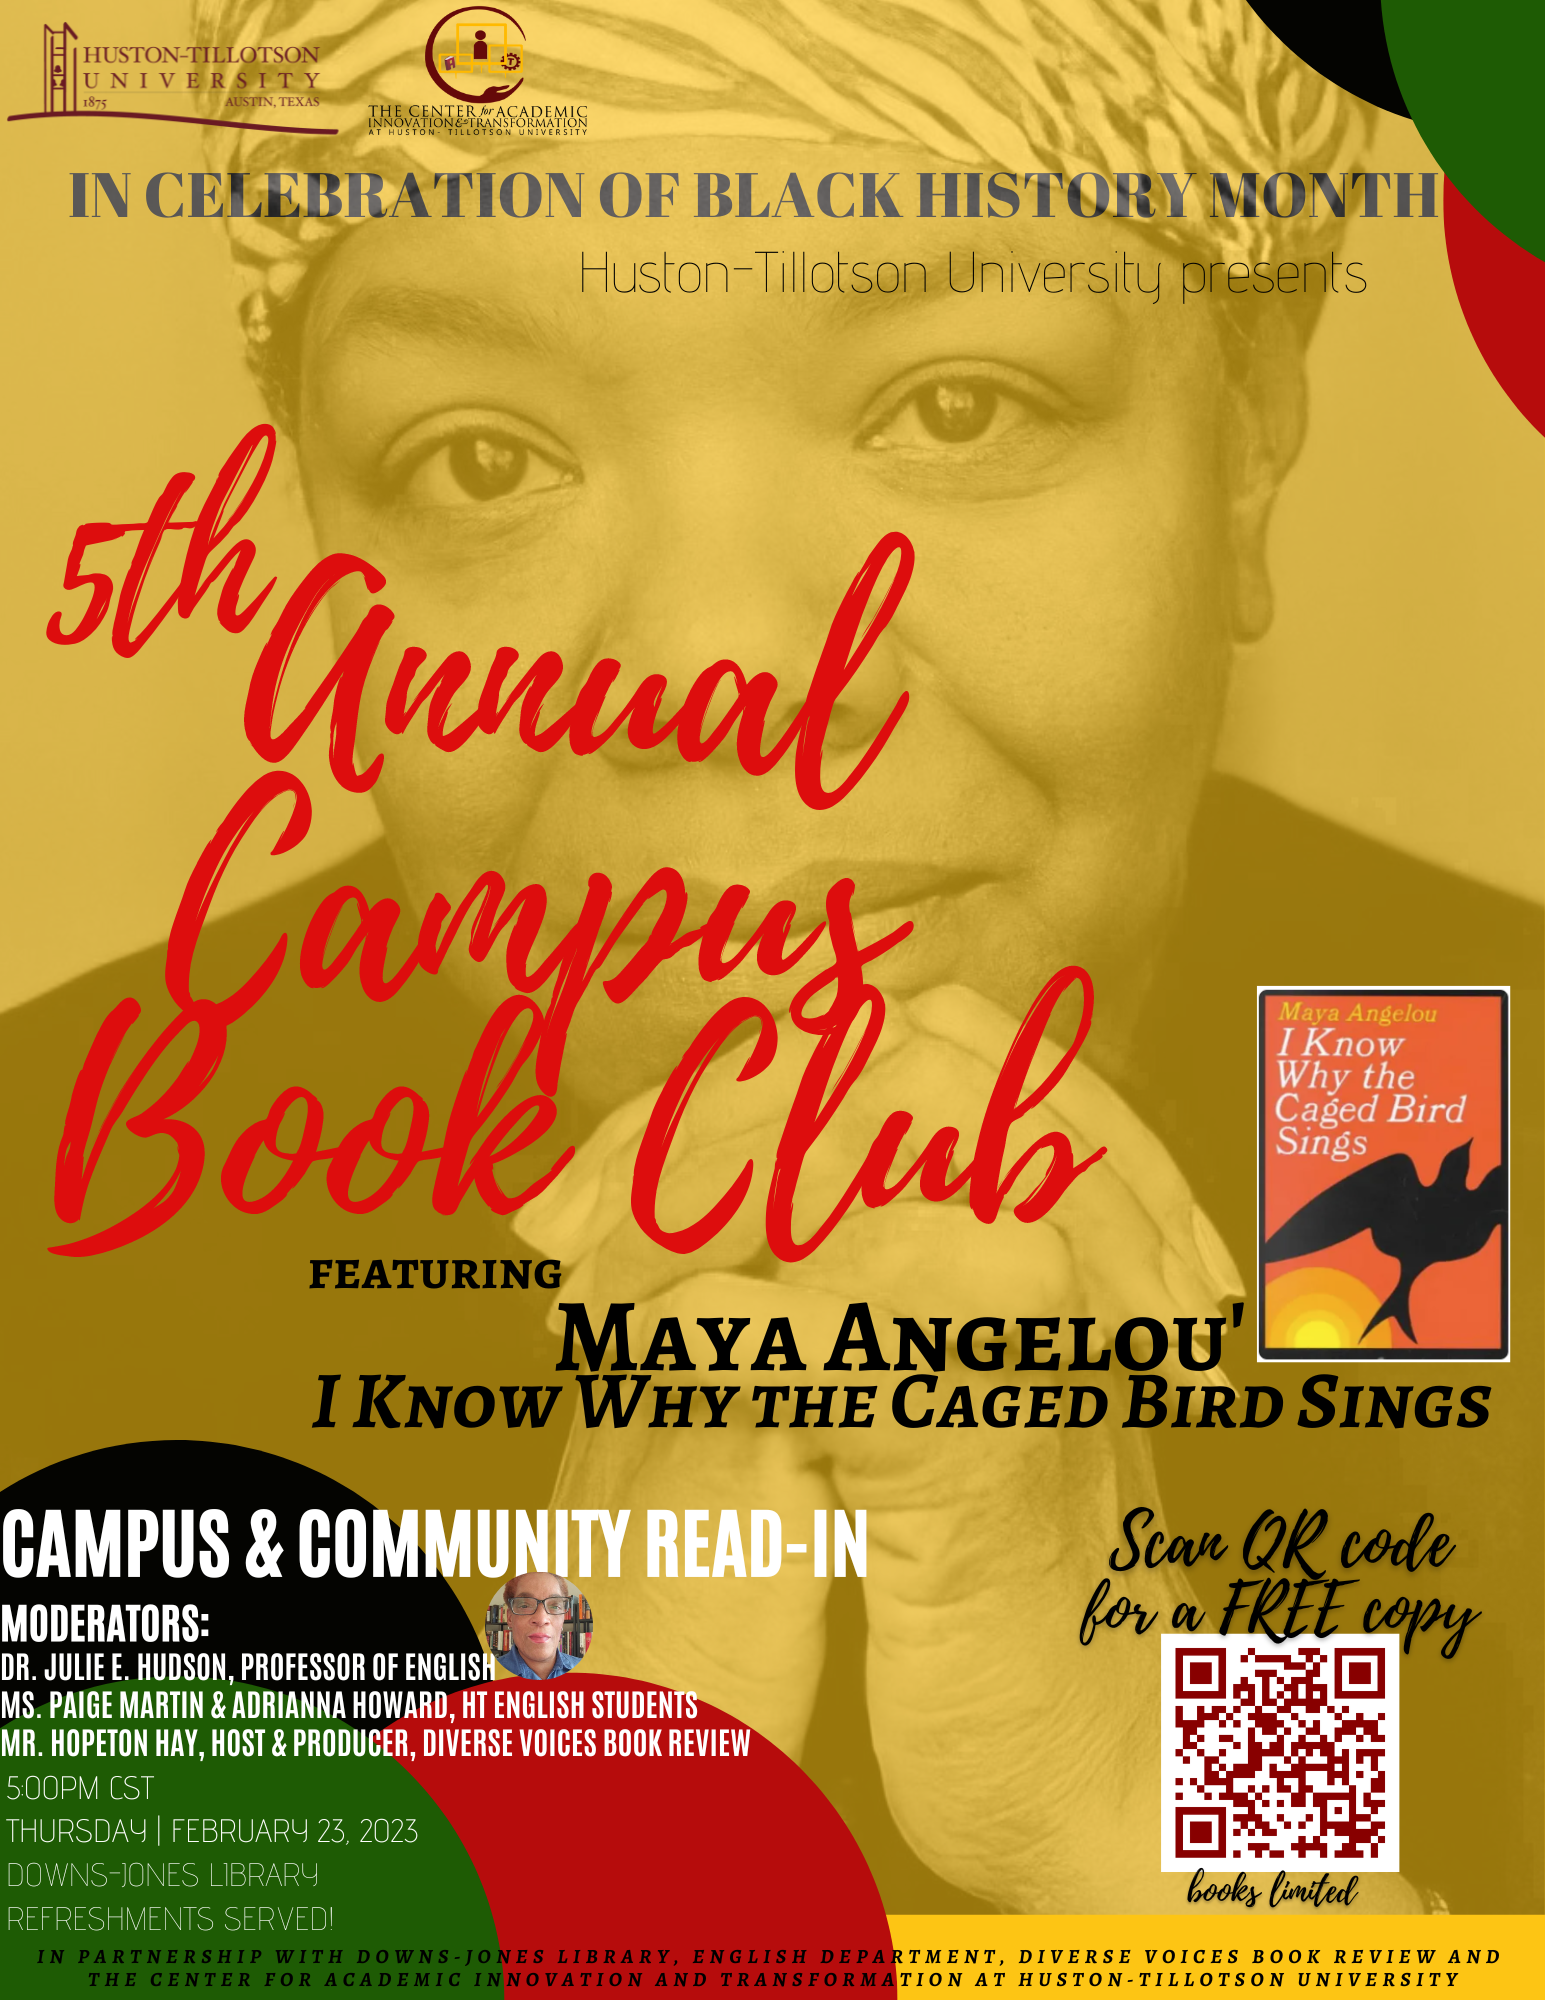 Poster for the 2023 Black History Month book club, featuring the face of Maya Angelou and information about the on-campus event on February 23rd at 5 PM in the library.